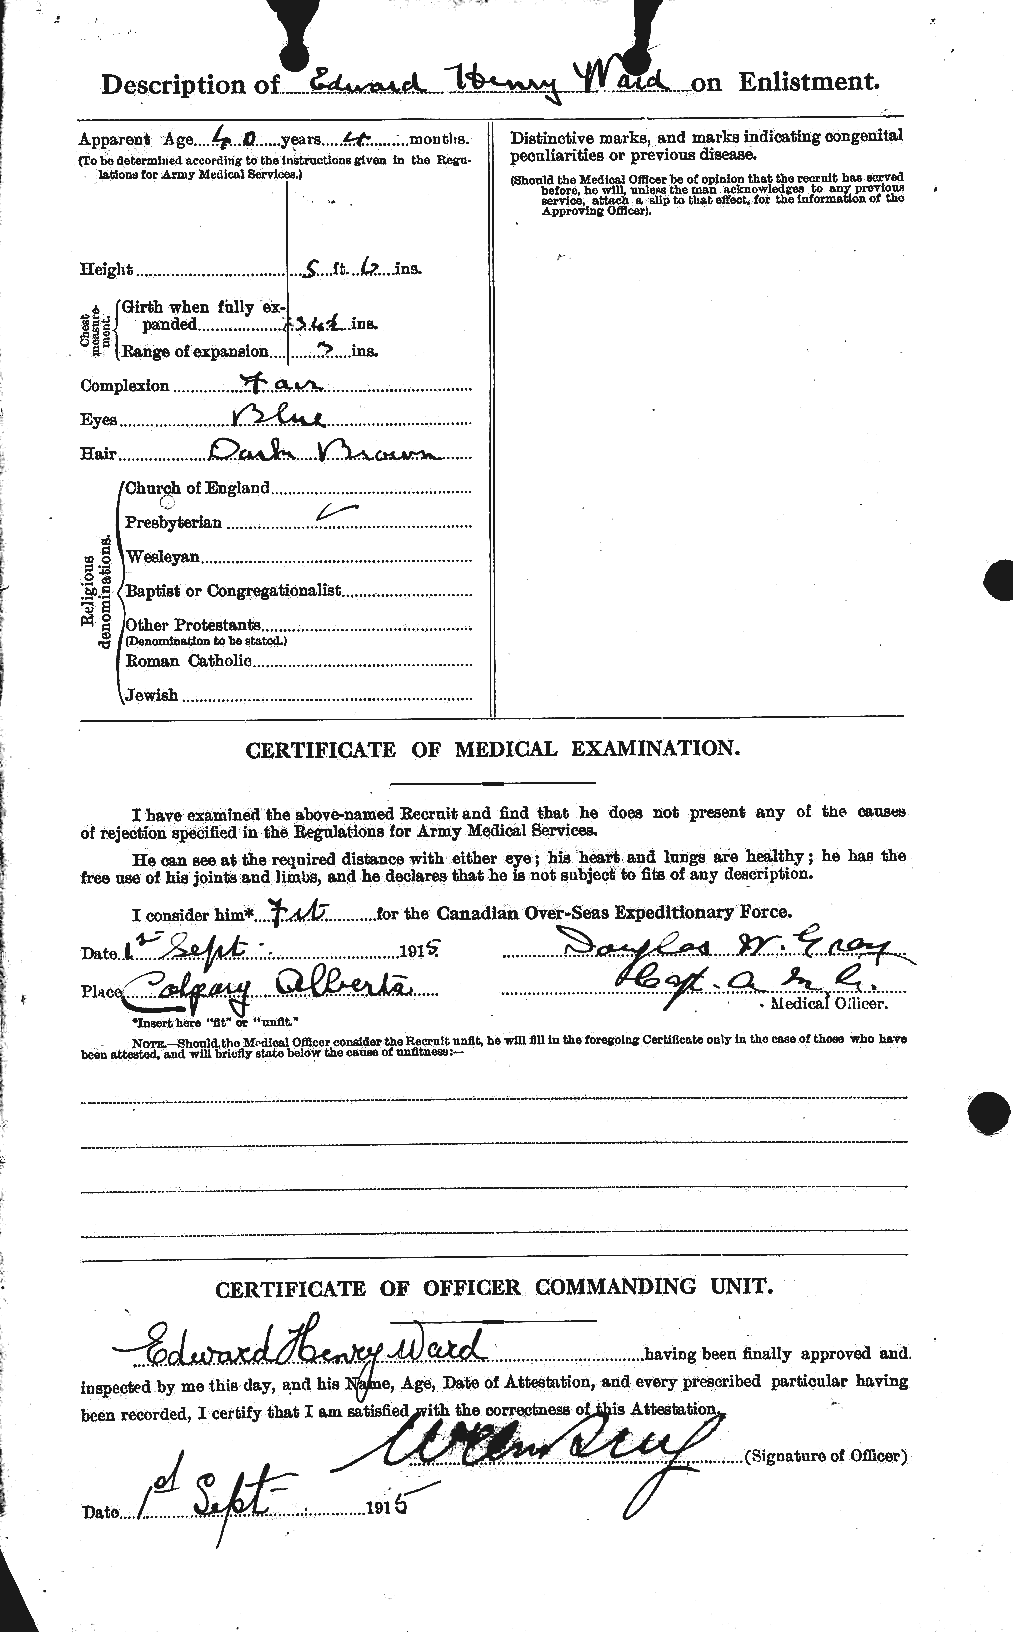 Personnel Records of the First World War - CEF 657651b